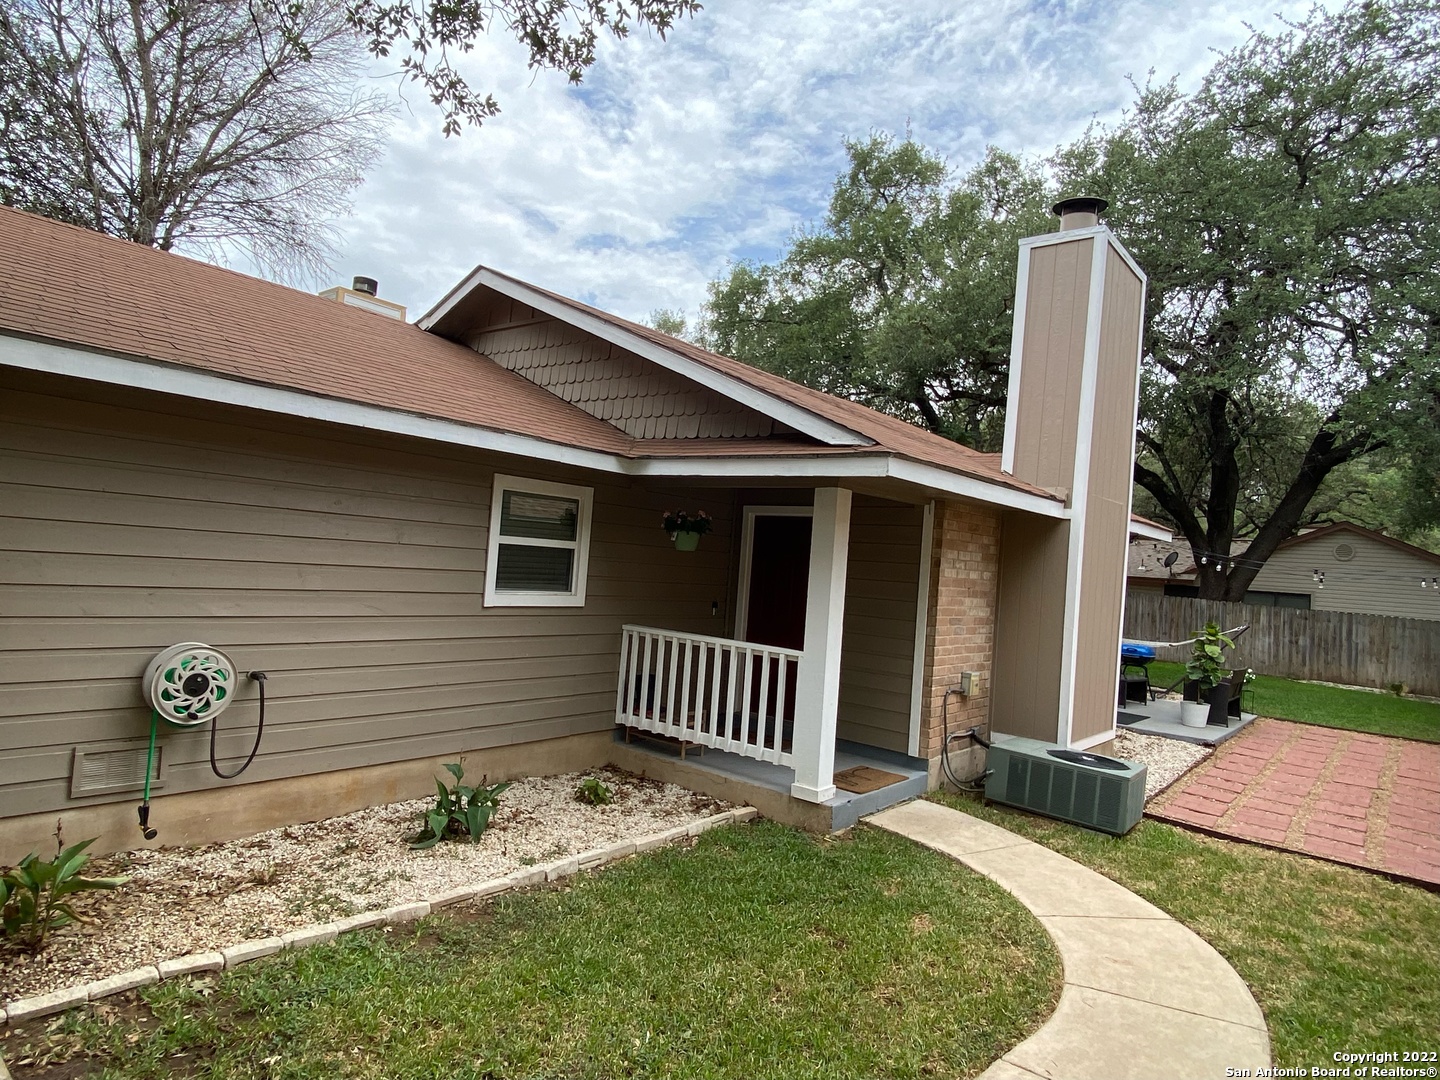 Beautiful home!!! Fully Renovated in 2020. You will love the calm oasis that this home provides. You can feel the love the owner has poured into this home. Close to UTSA, Medical Center, USAA, La Cantera and lots more for dining and entertainment.  This is an amazing opportunity for you if you are looking for a retreat, that is located just minutes from city living.